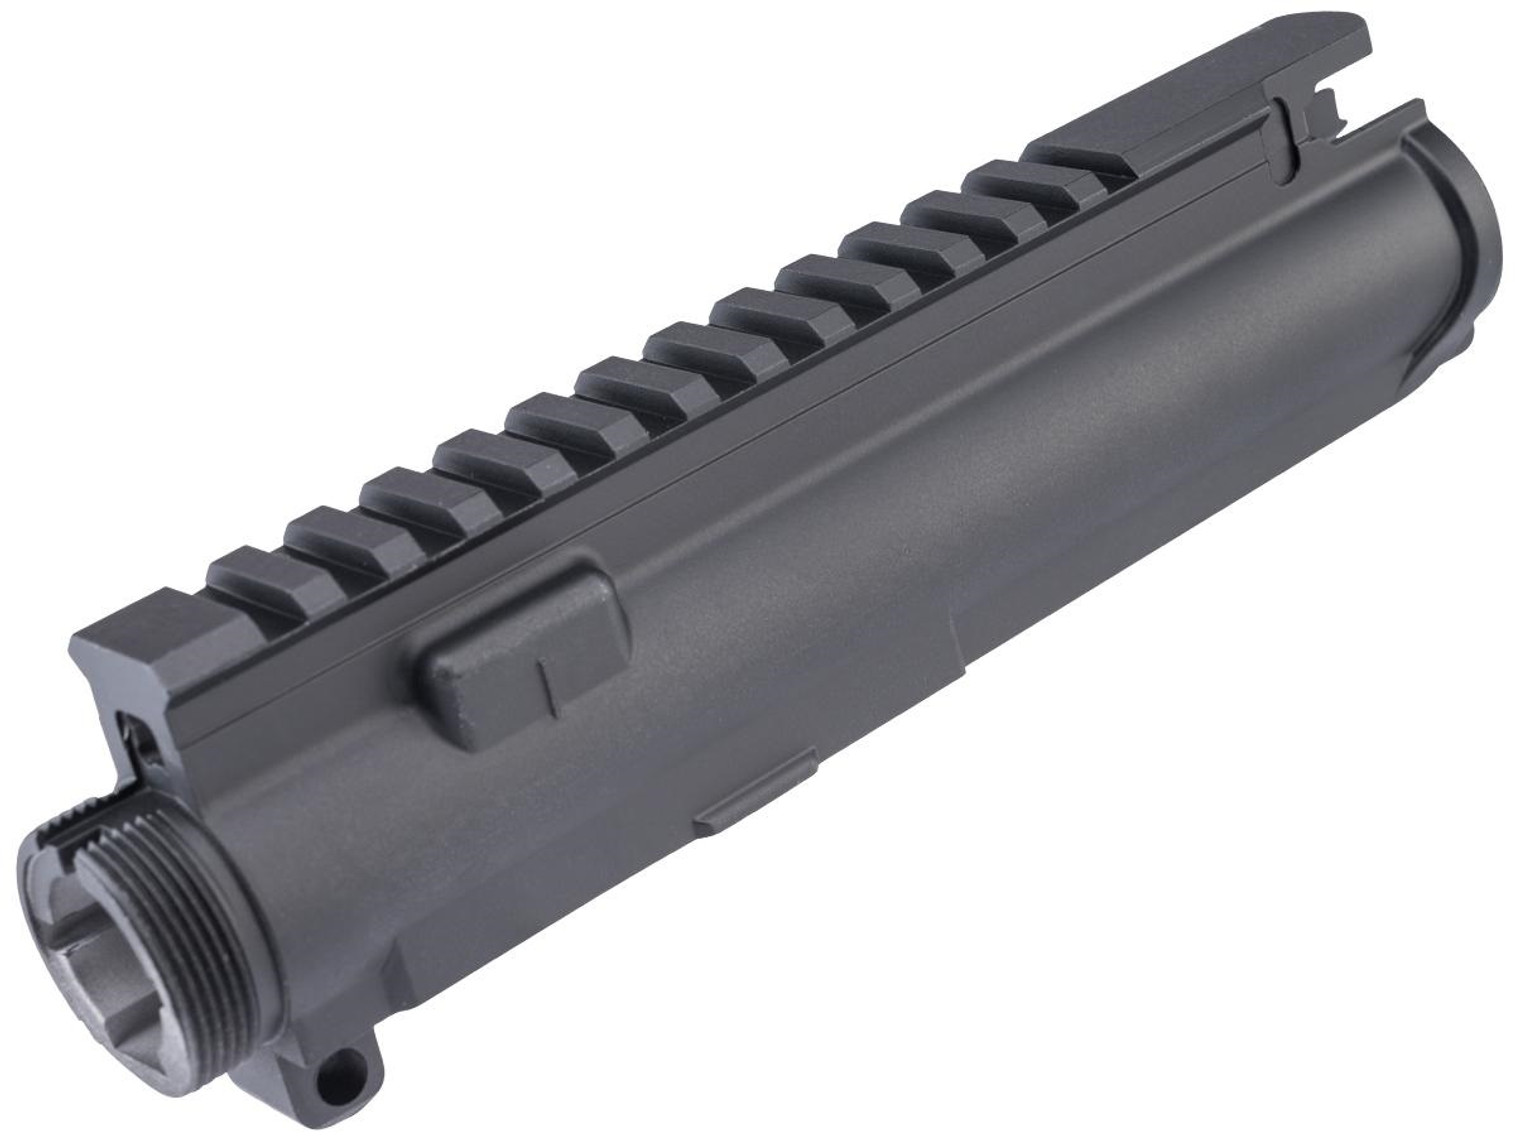 ARCTURUS Stripped Forged-Style Upper Receiver for M4 / M16 Airsoft AEG Rifles
